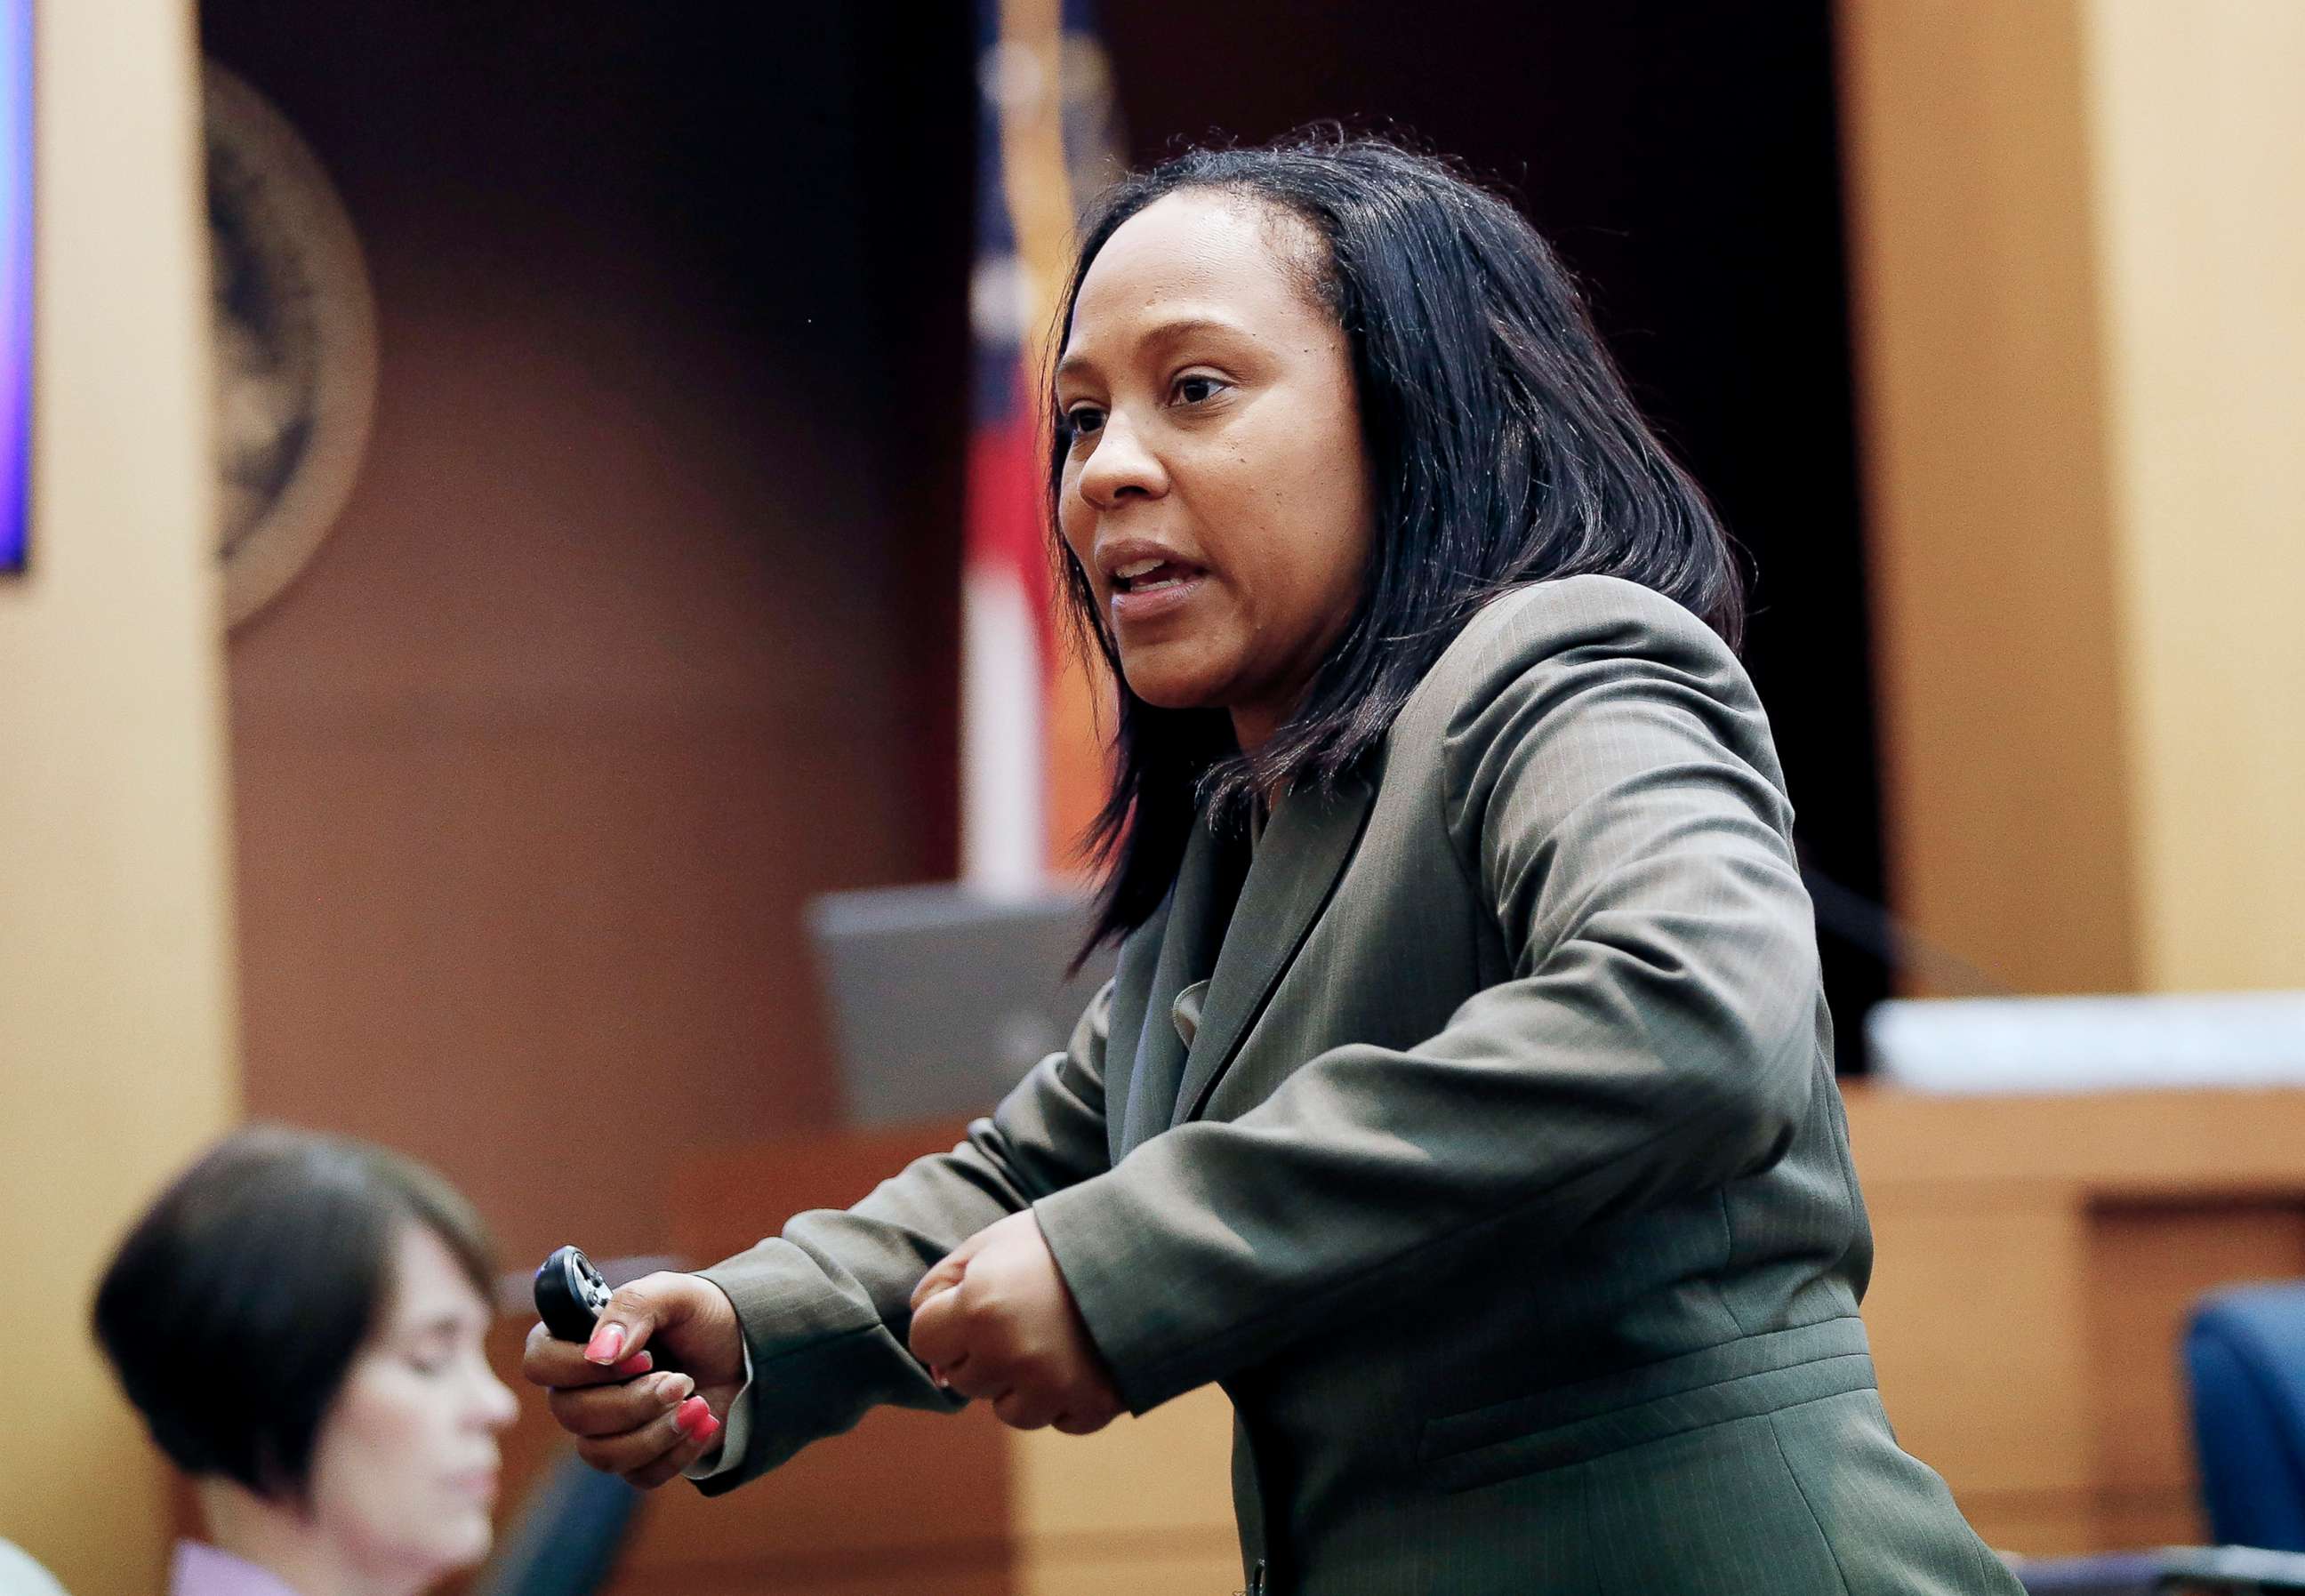 PHOTO: In this Aug. 24, 2016, file photo, Fulton County Deputy District Attorney Fani Willis makes her closing arguments during a trial in Atlanta.